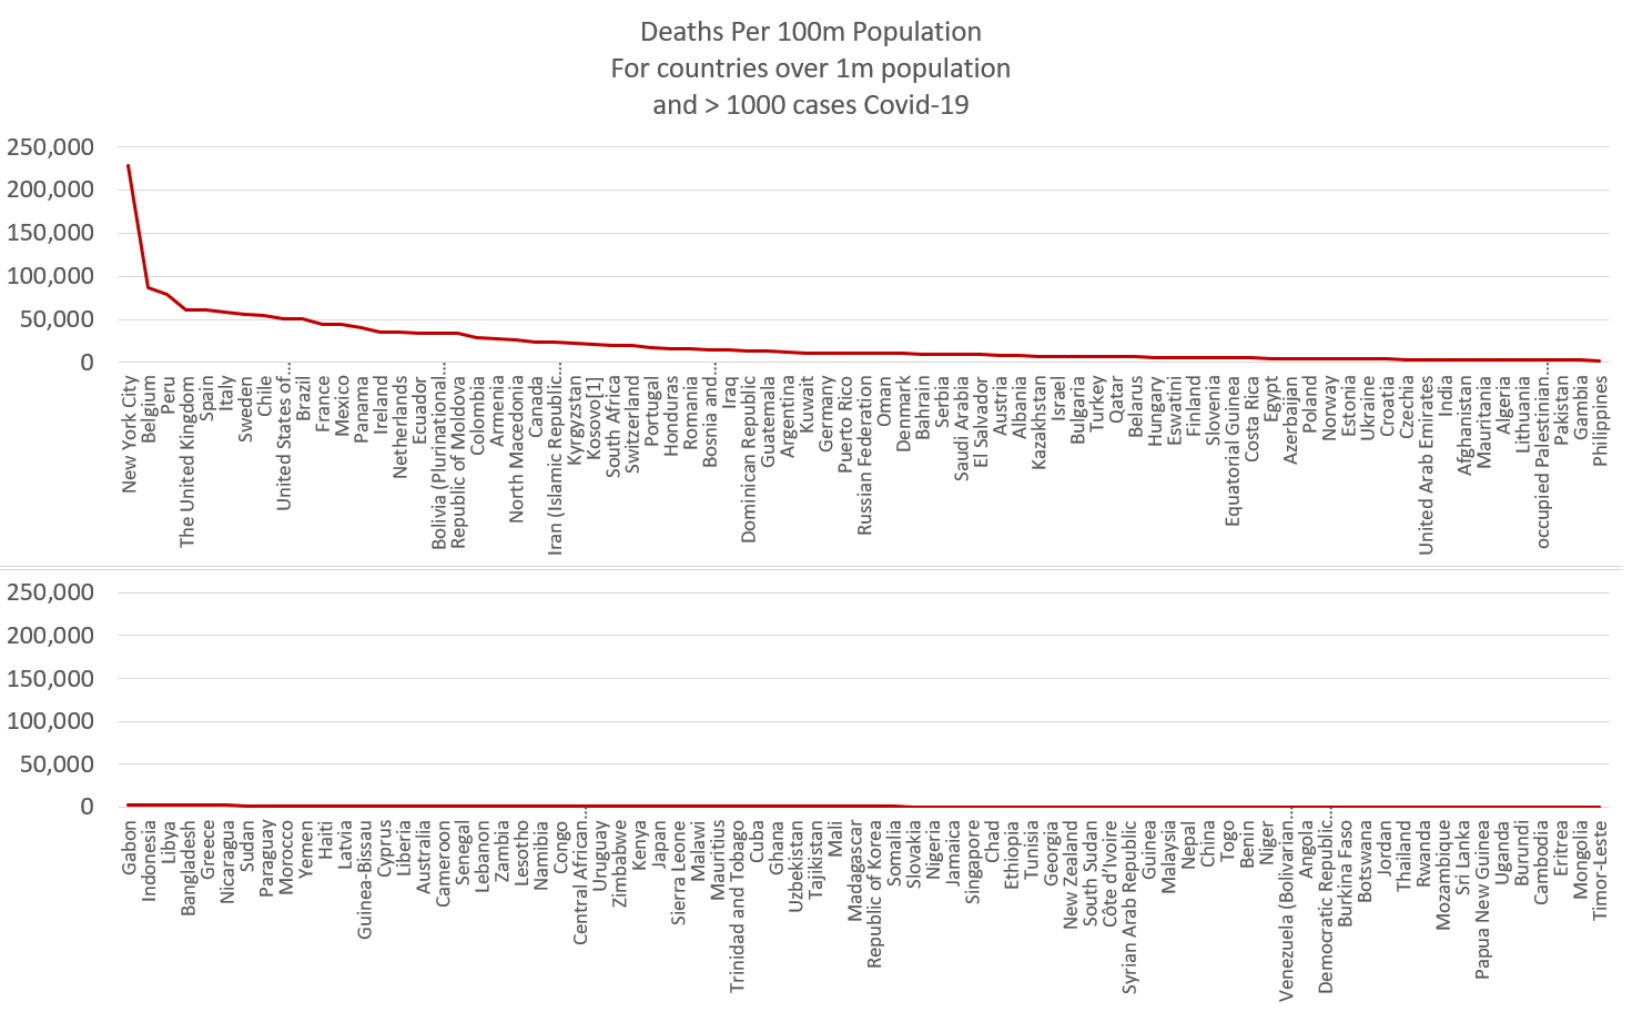 Covid-19 deaths by country per 100m population (Sept. 2020).